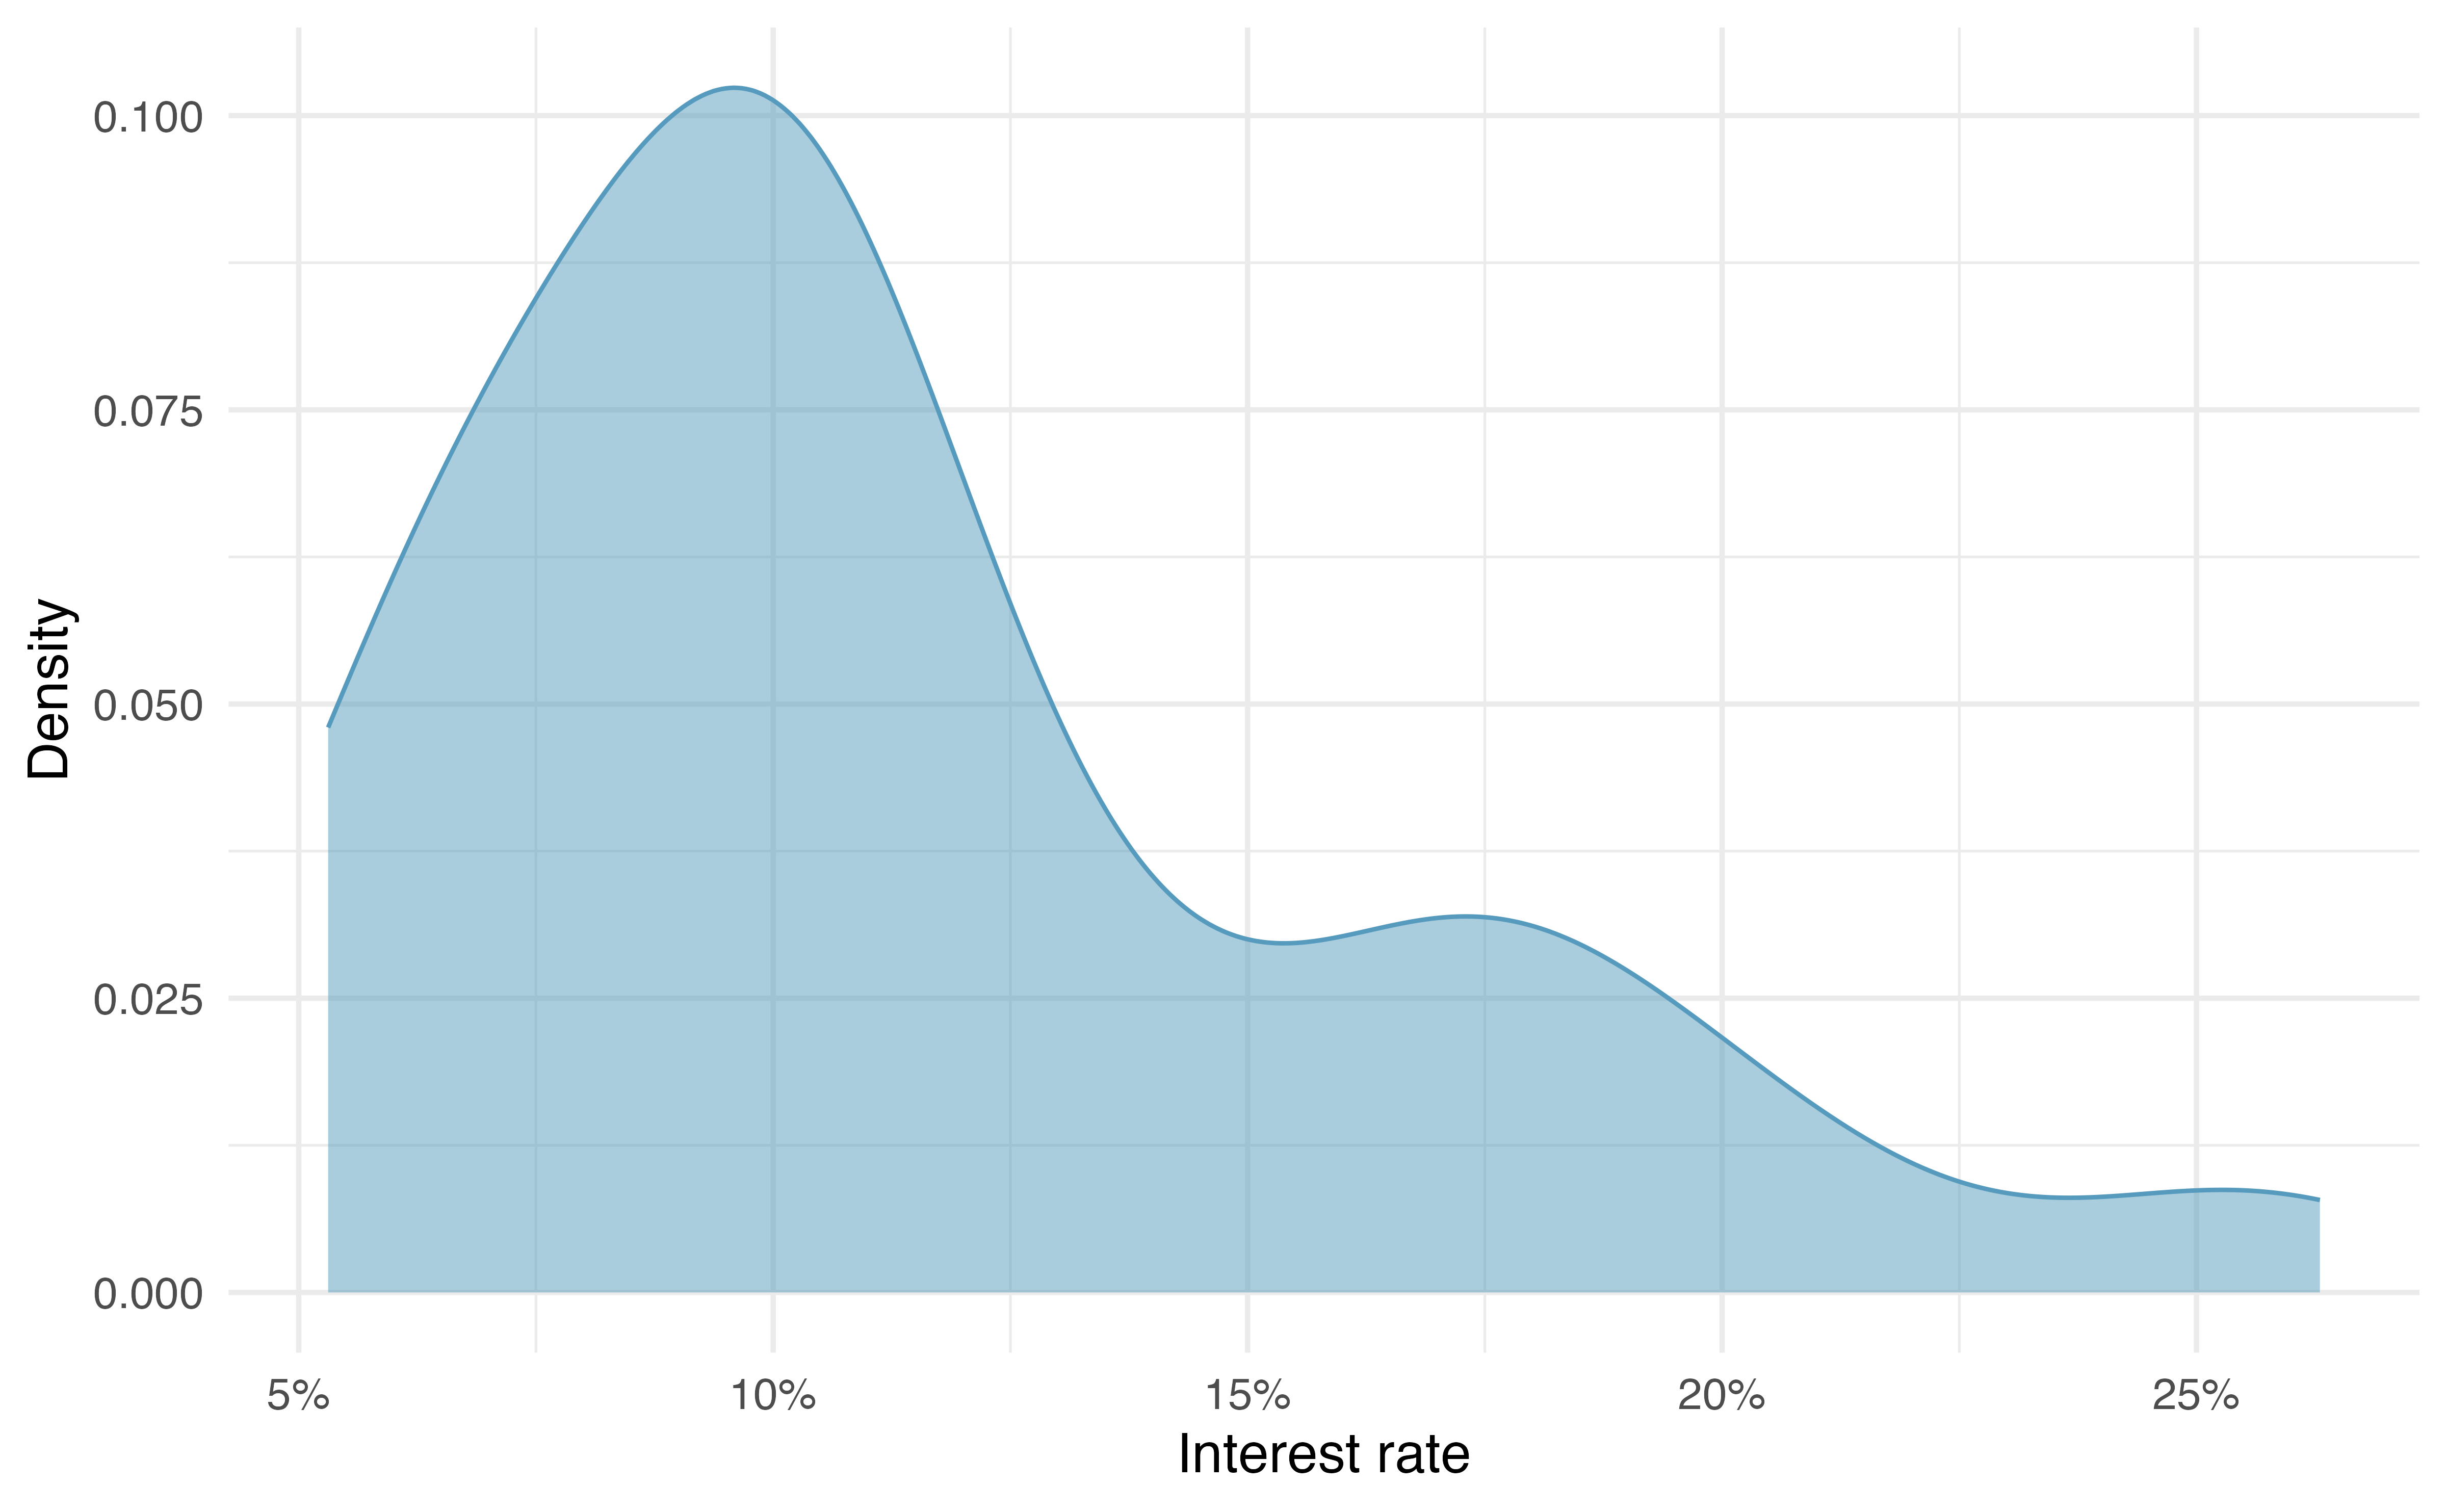 A density plot of interest rate (ranging from about 5% to 25%). The distribution is right skewed.